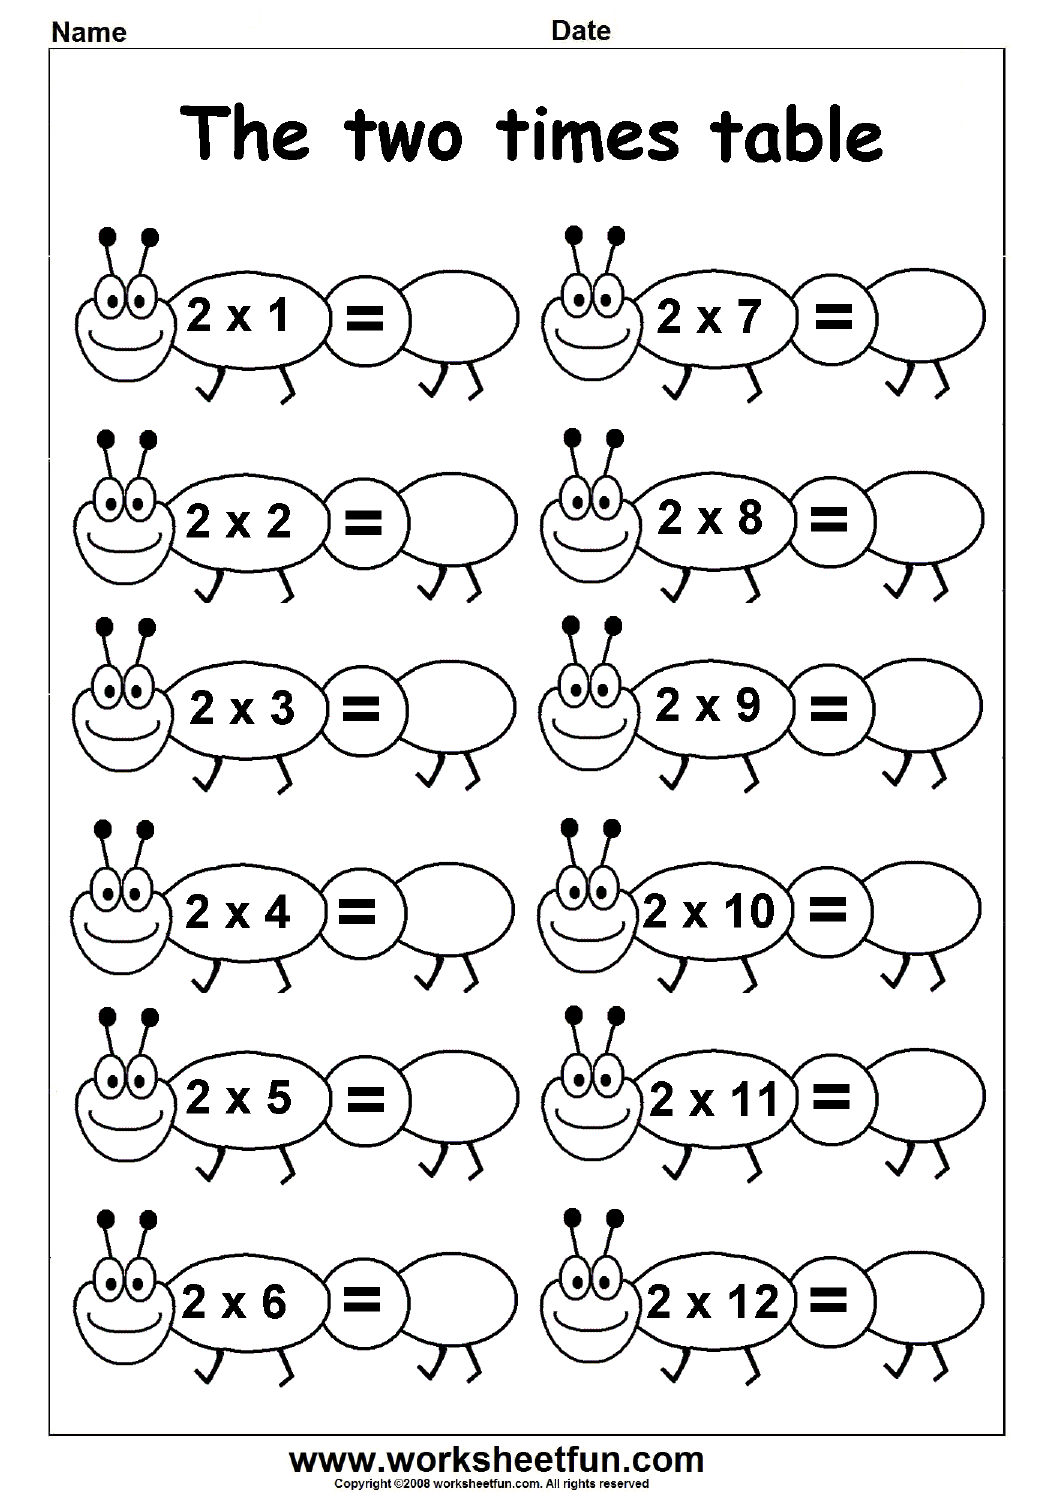 Multiplication Times Tables Worksheets – 20, 20, 20, 20, 20 & 20 Times For 2 Times Table Worksheet